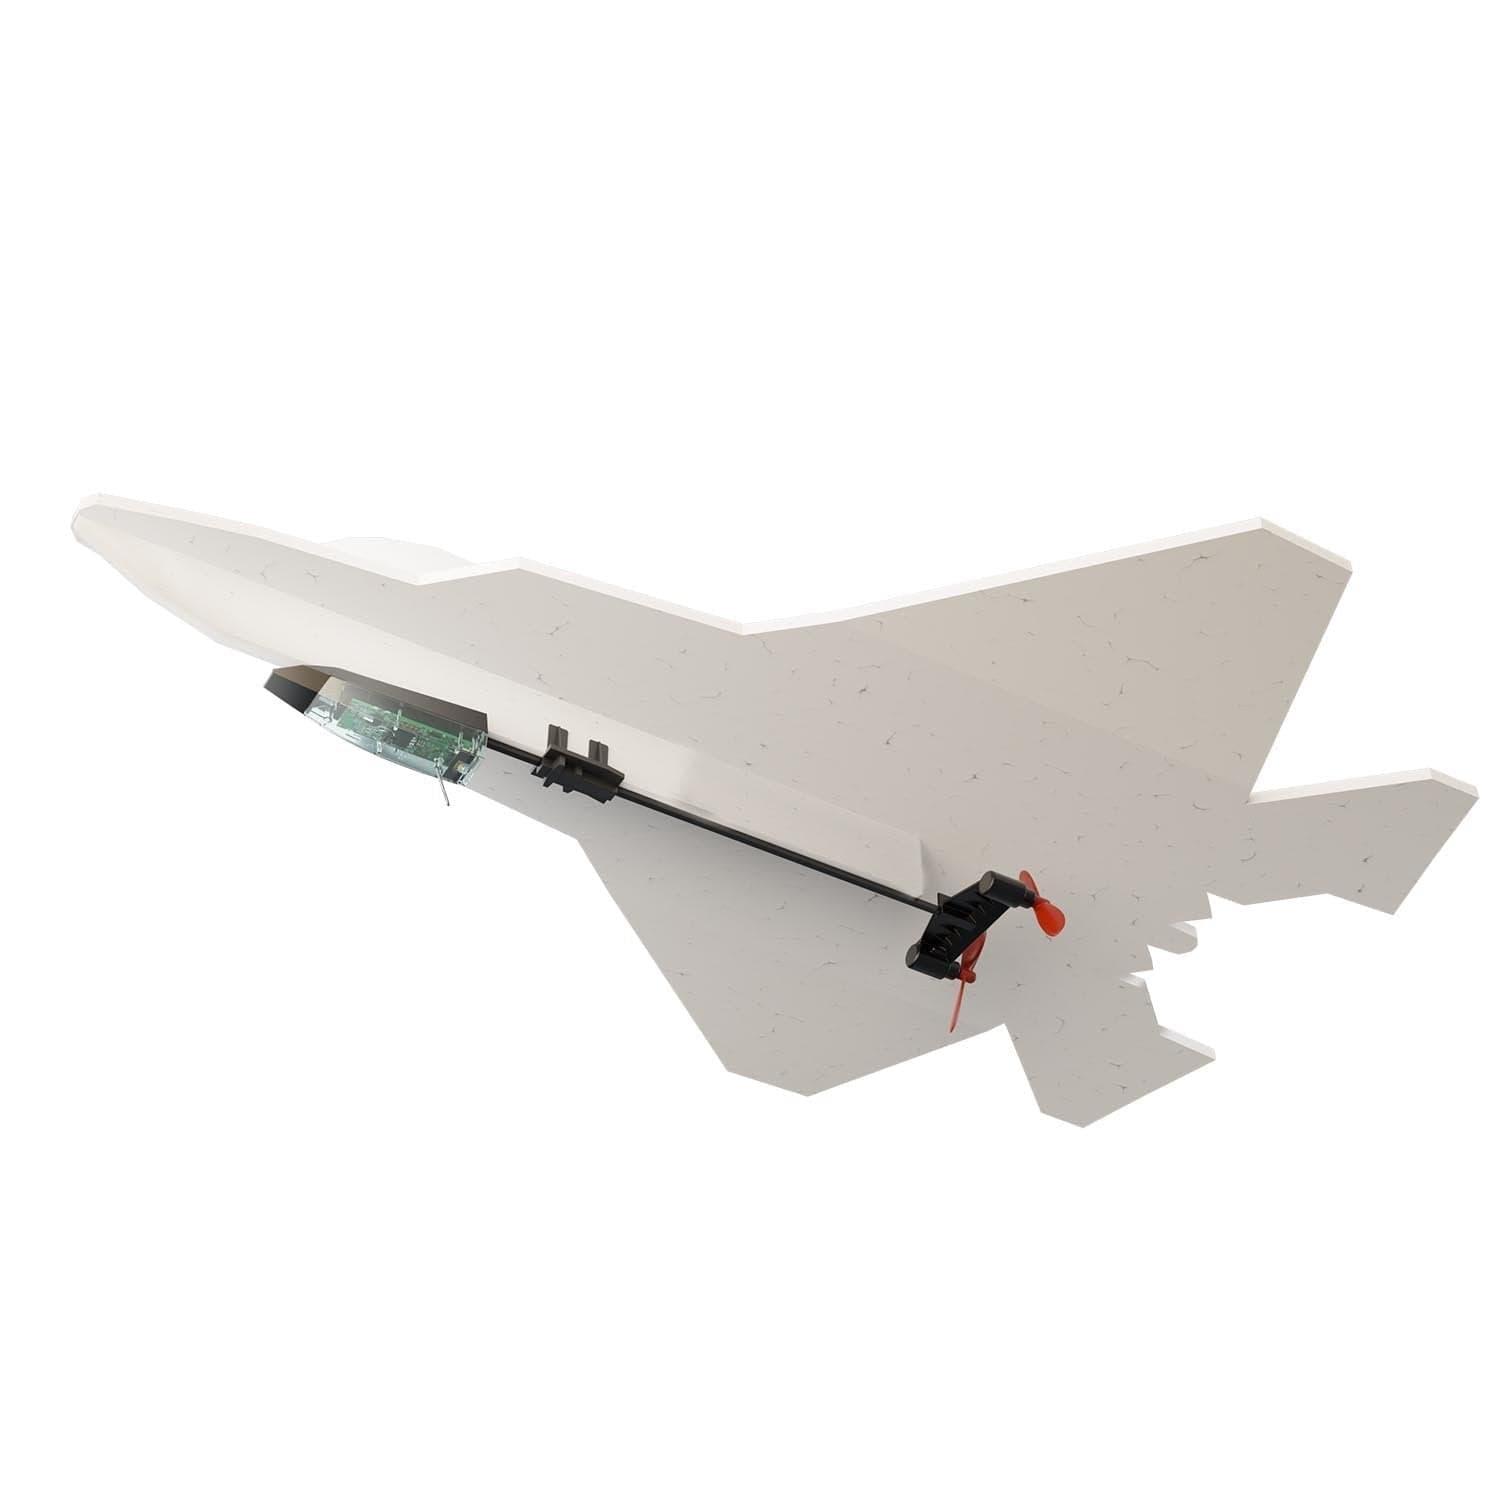 Raptor Rc Plane: Recommended retailers and tips for purchasing the Raptor RC Plane